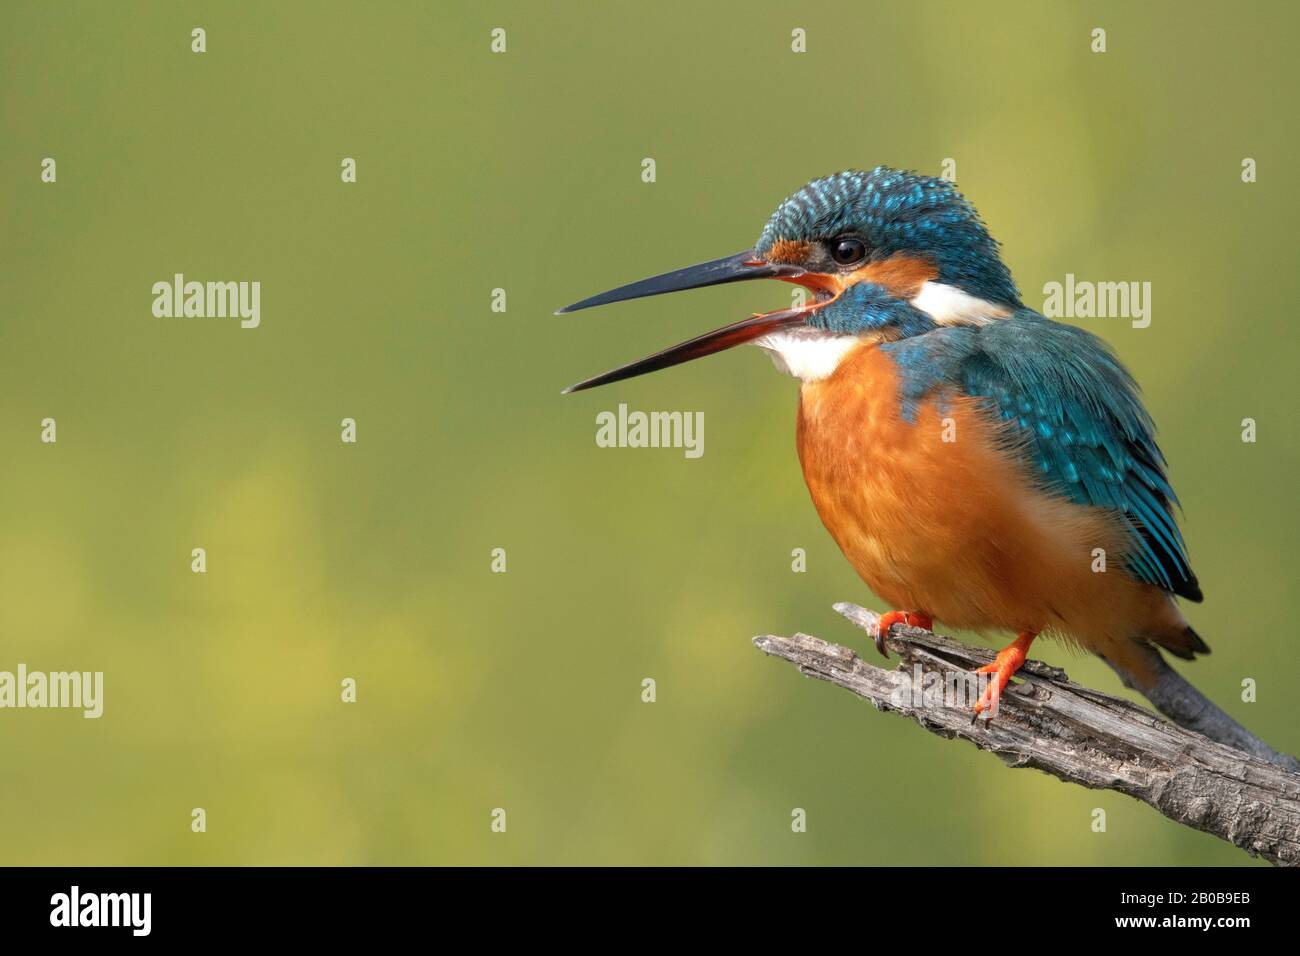 Parc National Keoladeo, Bharatpur, Rajasthan, Inde. Kingfisher Commun, Alcedo Atthis Banque D'Images